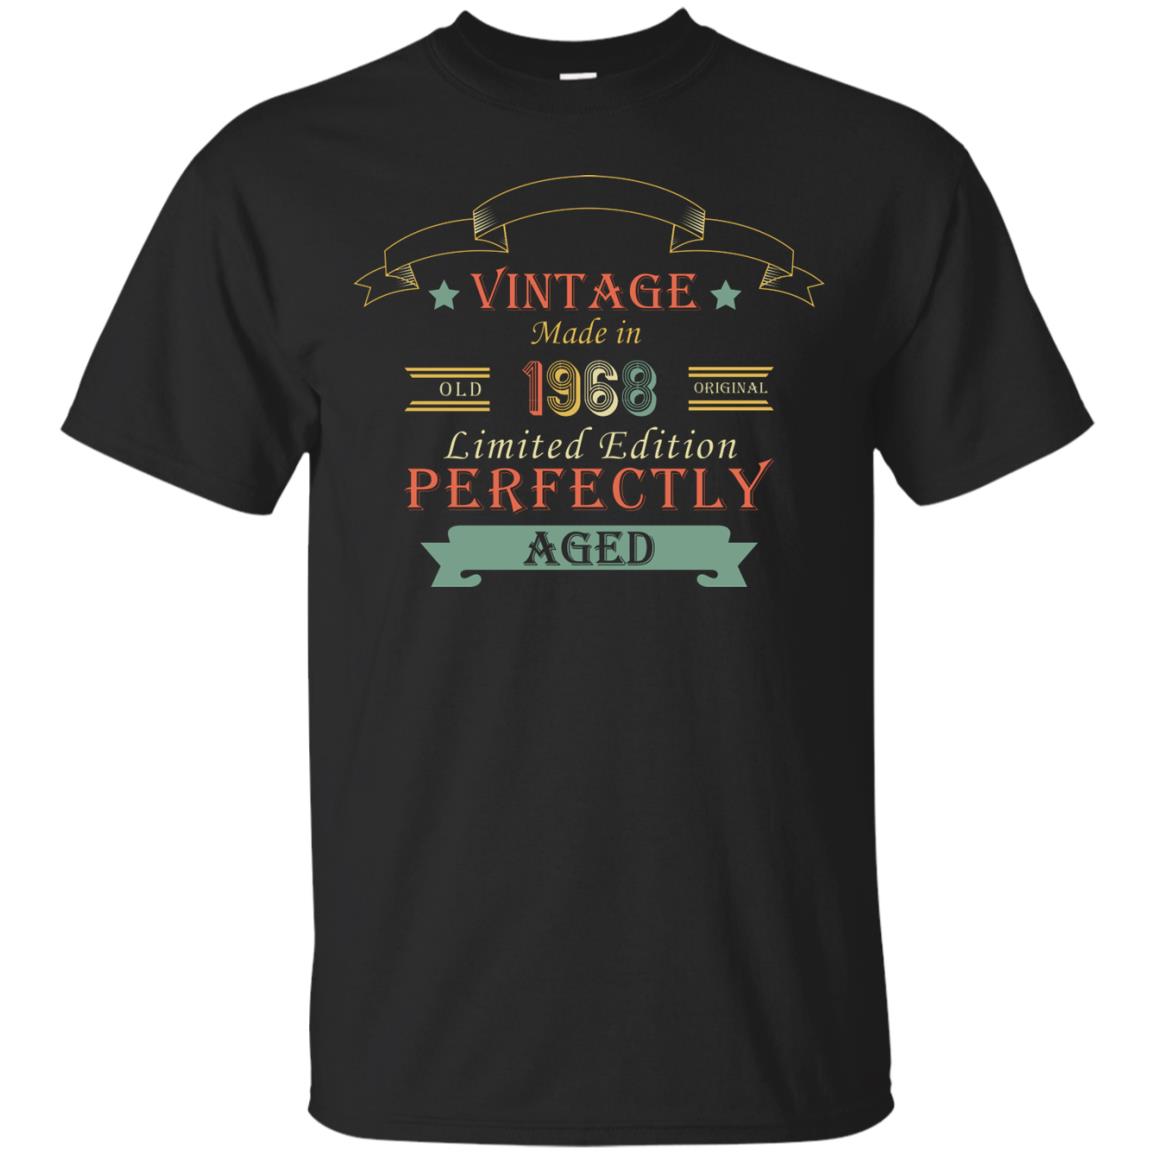 Vintage Made In Old 1968 Original Limited Edition Perfectly Aged 50th Birthday T-shirtG200 Gildan Ultra Cotton T-Shirt